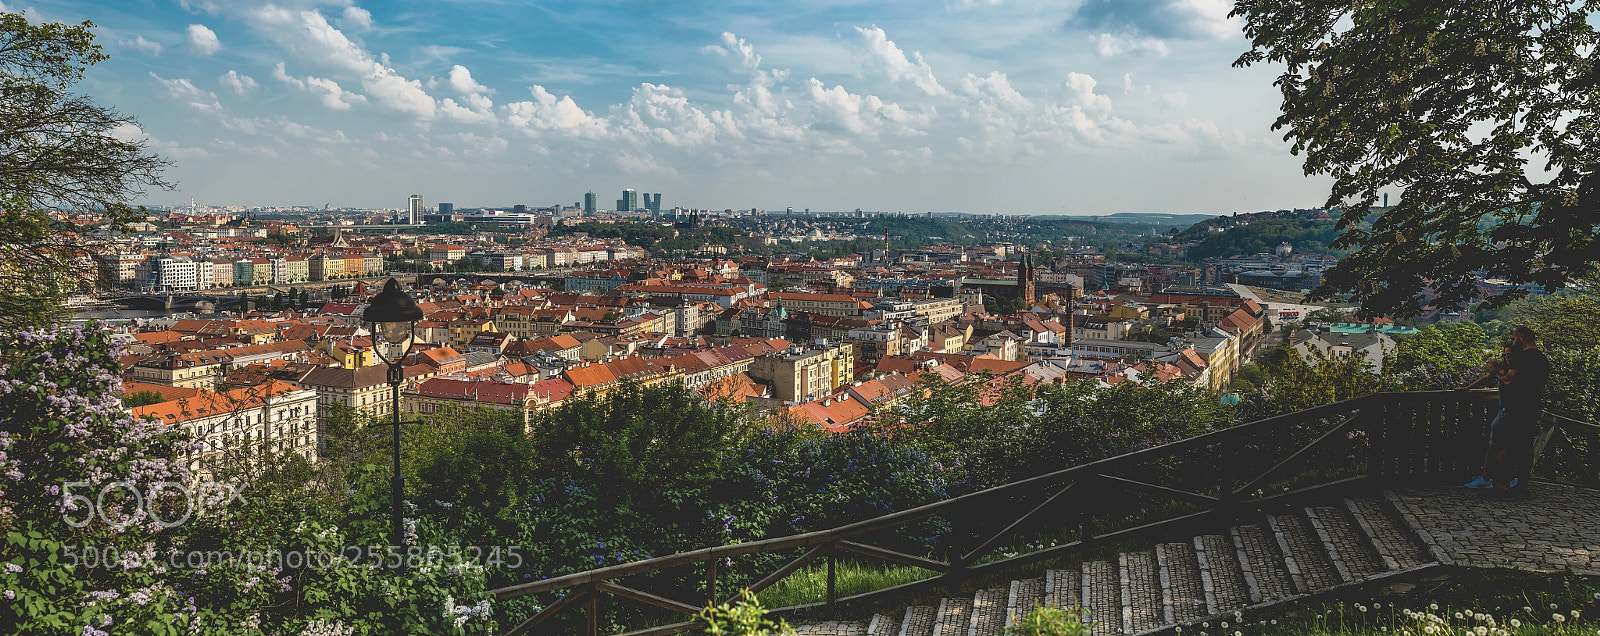 Sony a7S sample photo. Old town / prague photography